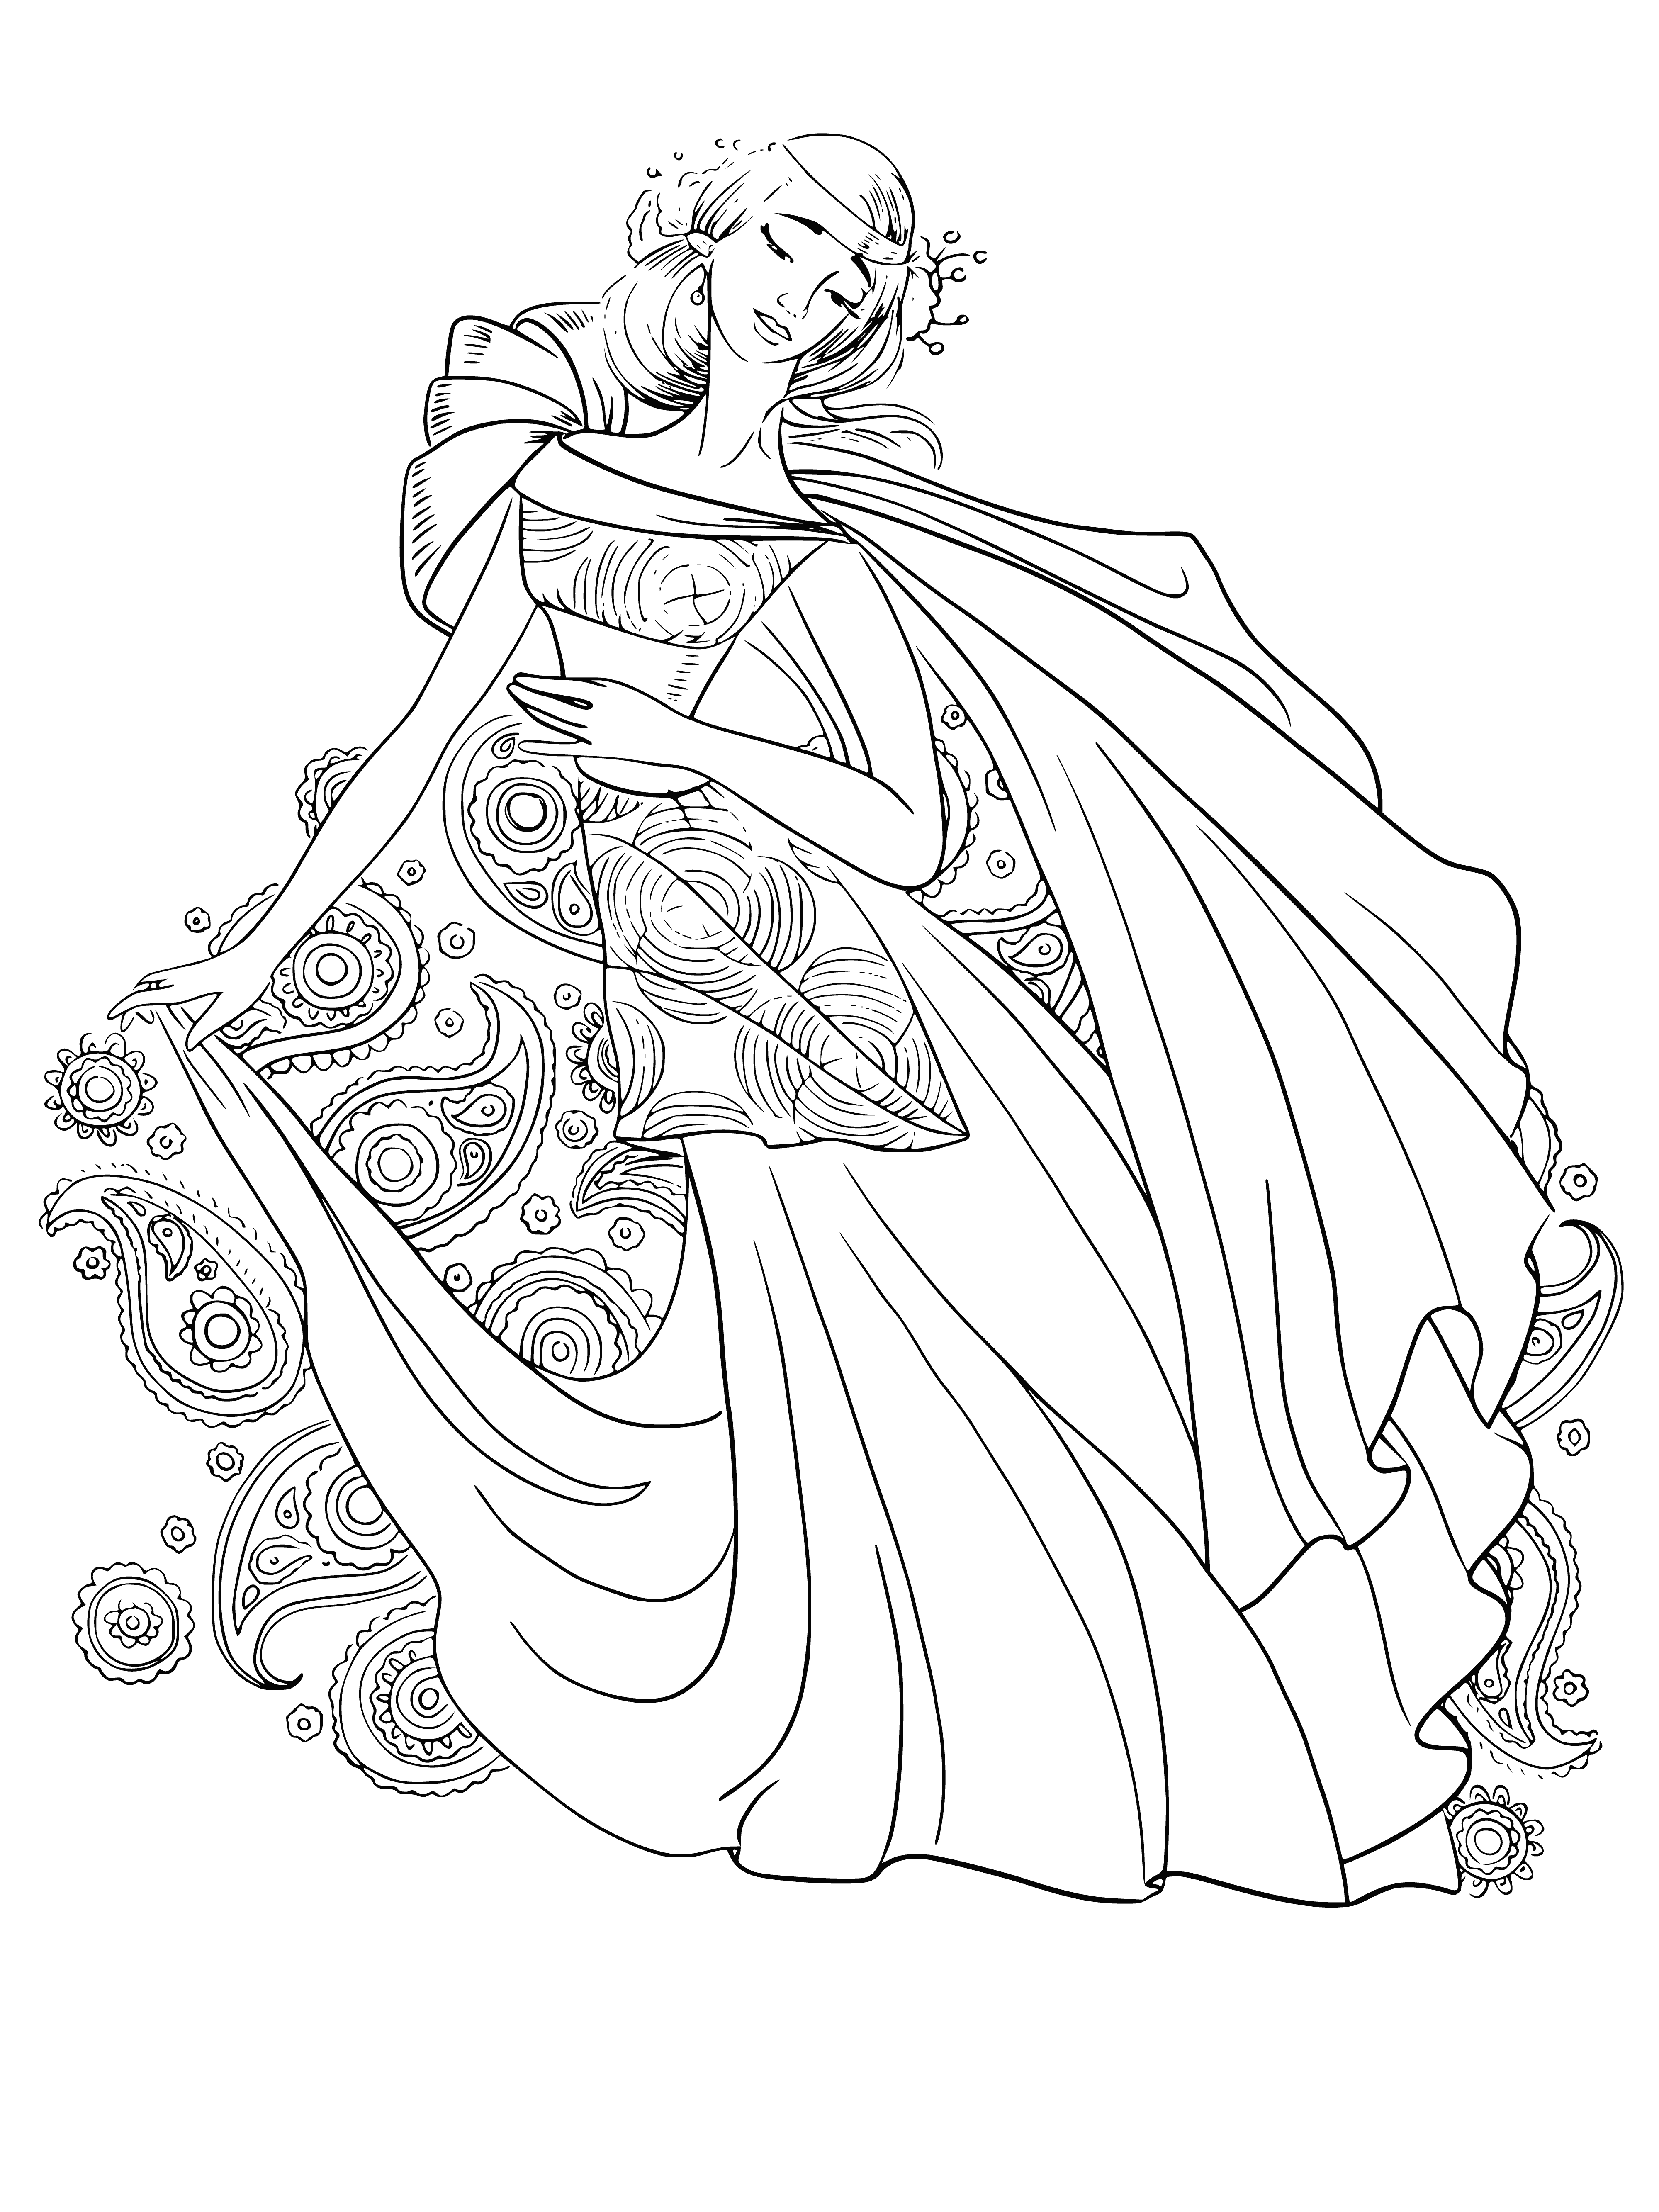 coloring page: Girl in a flowy outfit ready for take-off in black & white coloring page. #AdultColoring #Antistress #GirlsAirOutfit